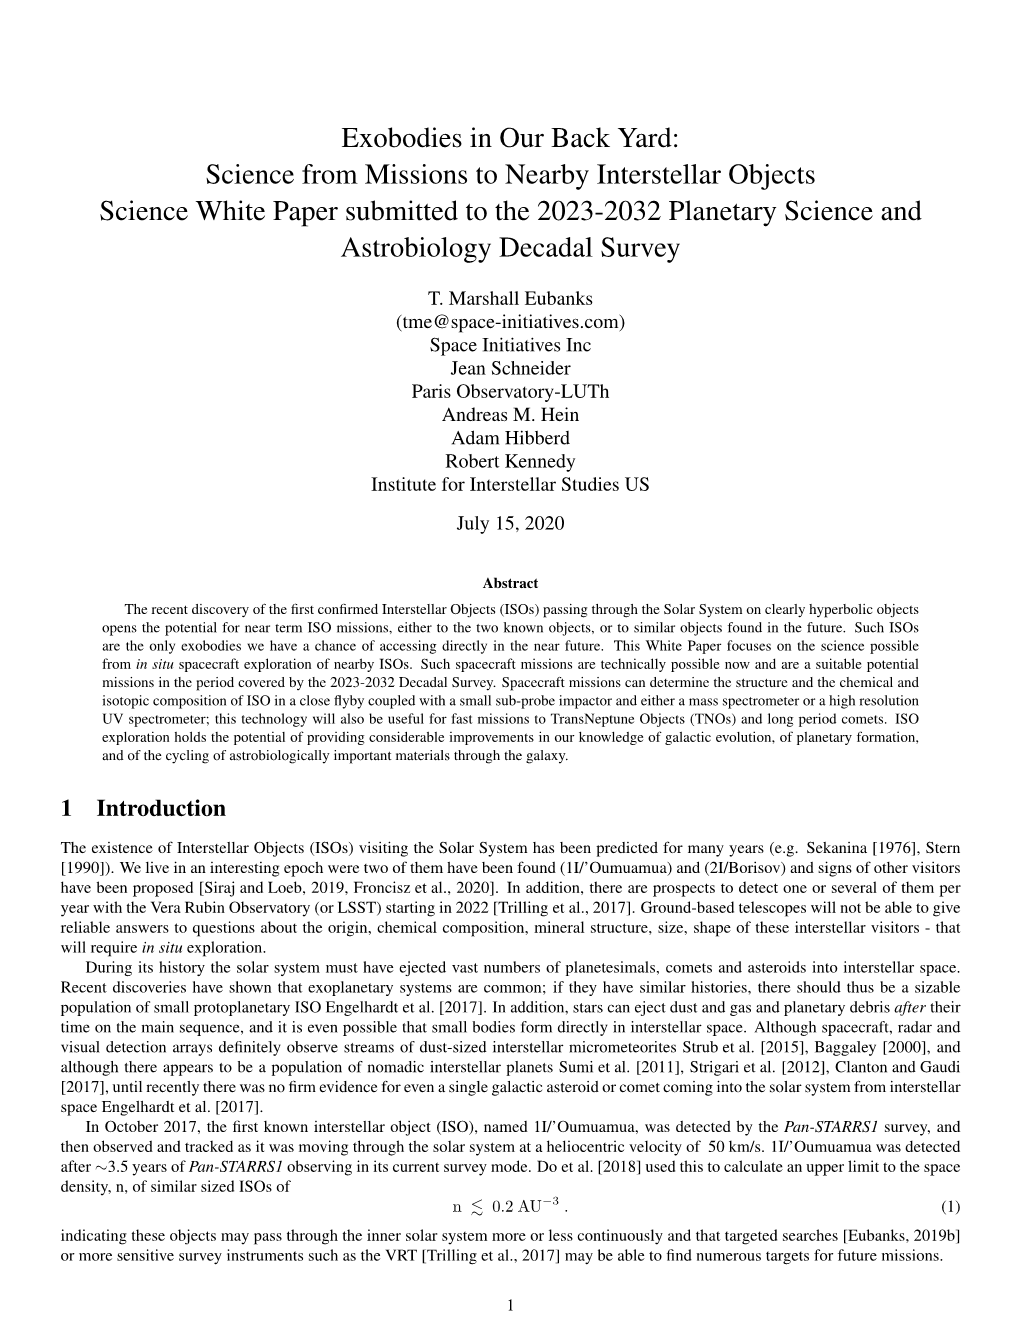 Science from Missions to Nearby Interstellar Objects Science White Paper Submitted to the 2023-2032 Planetary Science and Astrobiology Decadal Survey